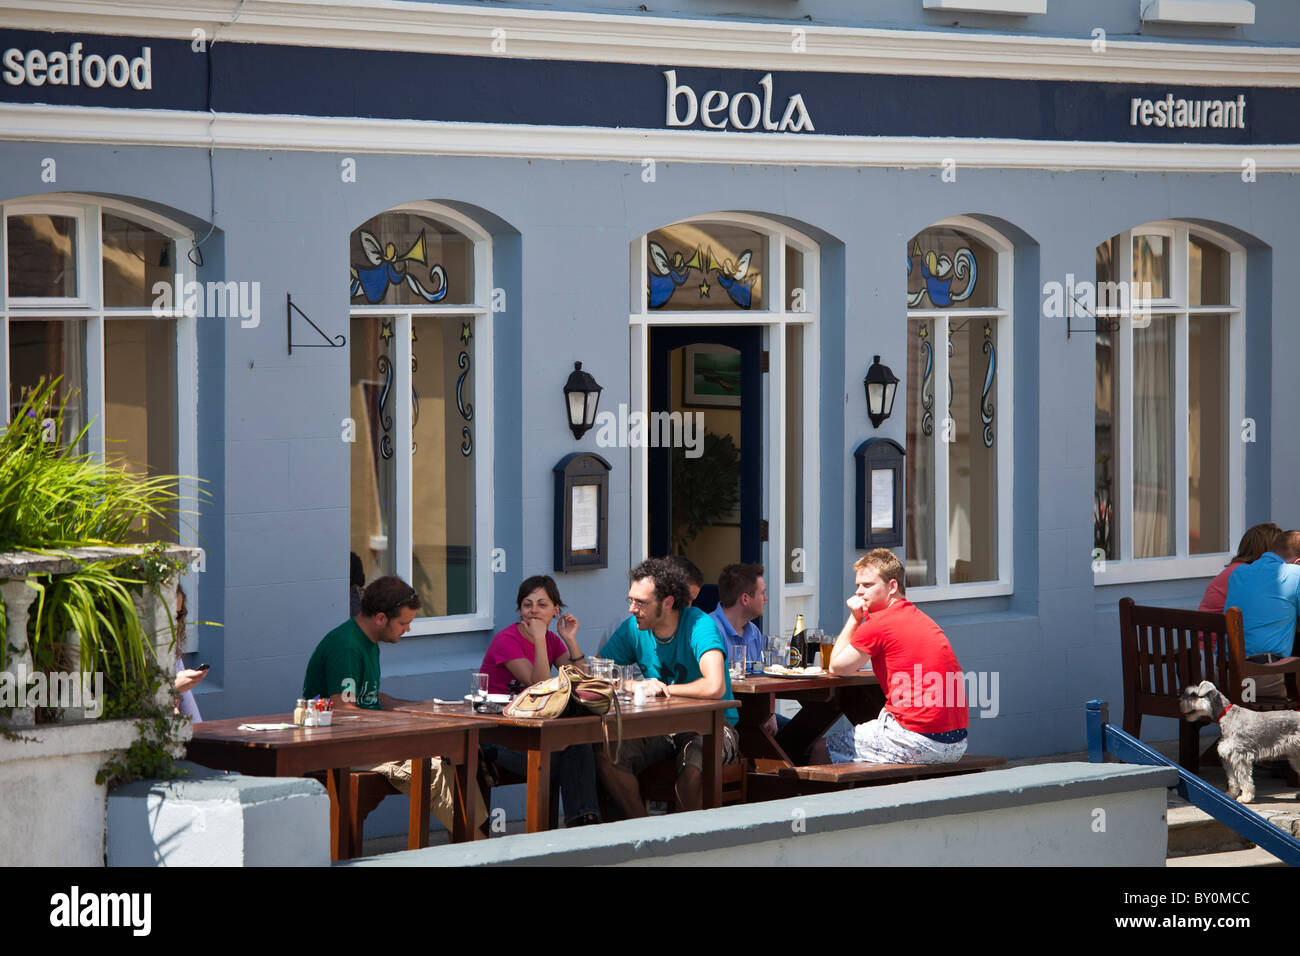 Tourists at Beola seafood restaurant in Roundstone, Connemara, County Galway, Ireland Stock Photo